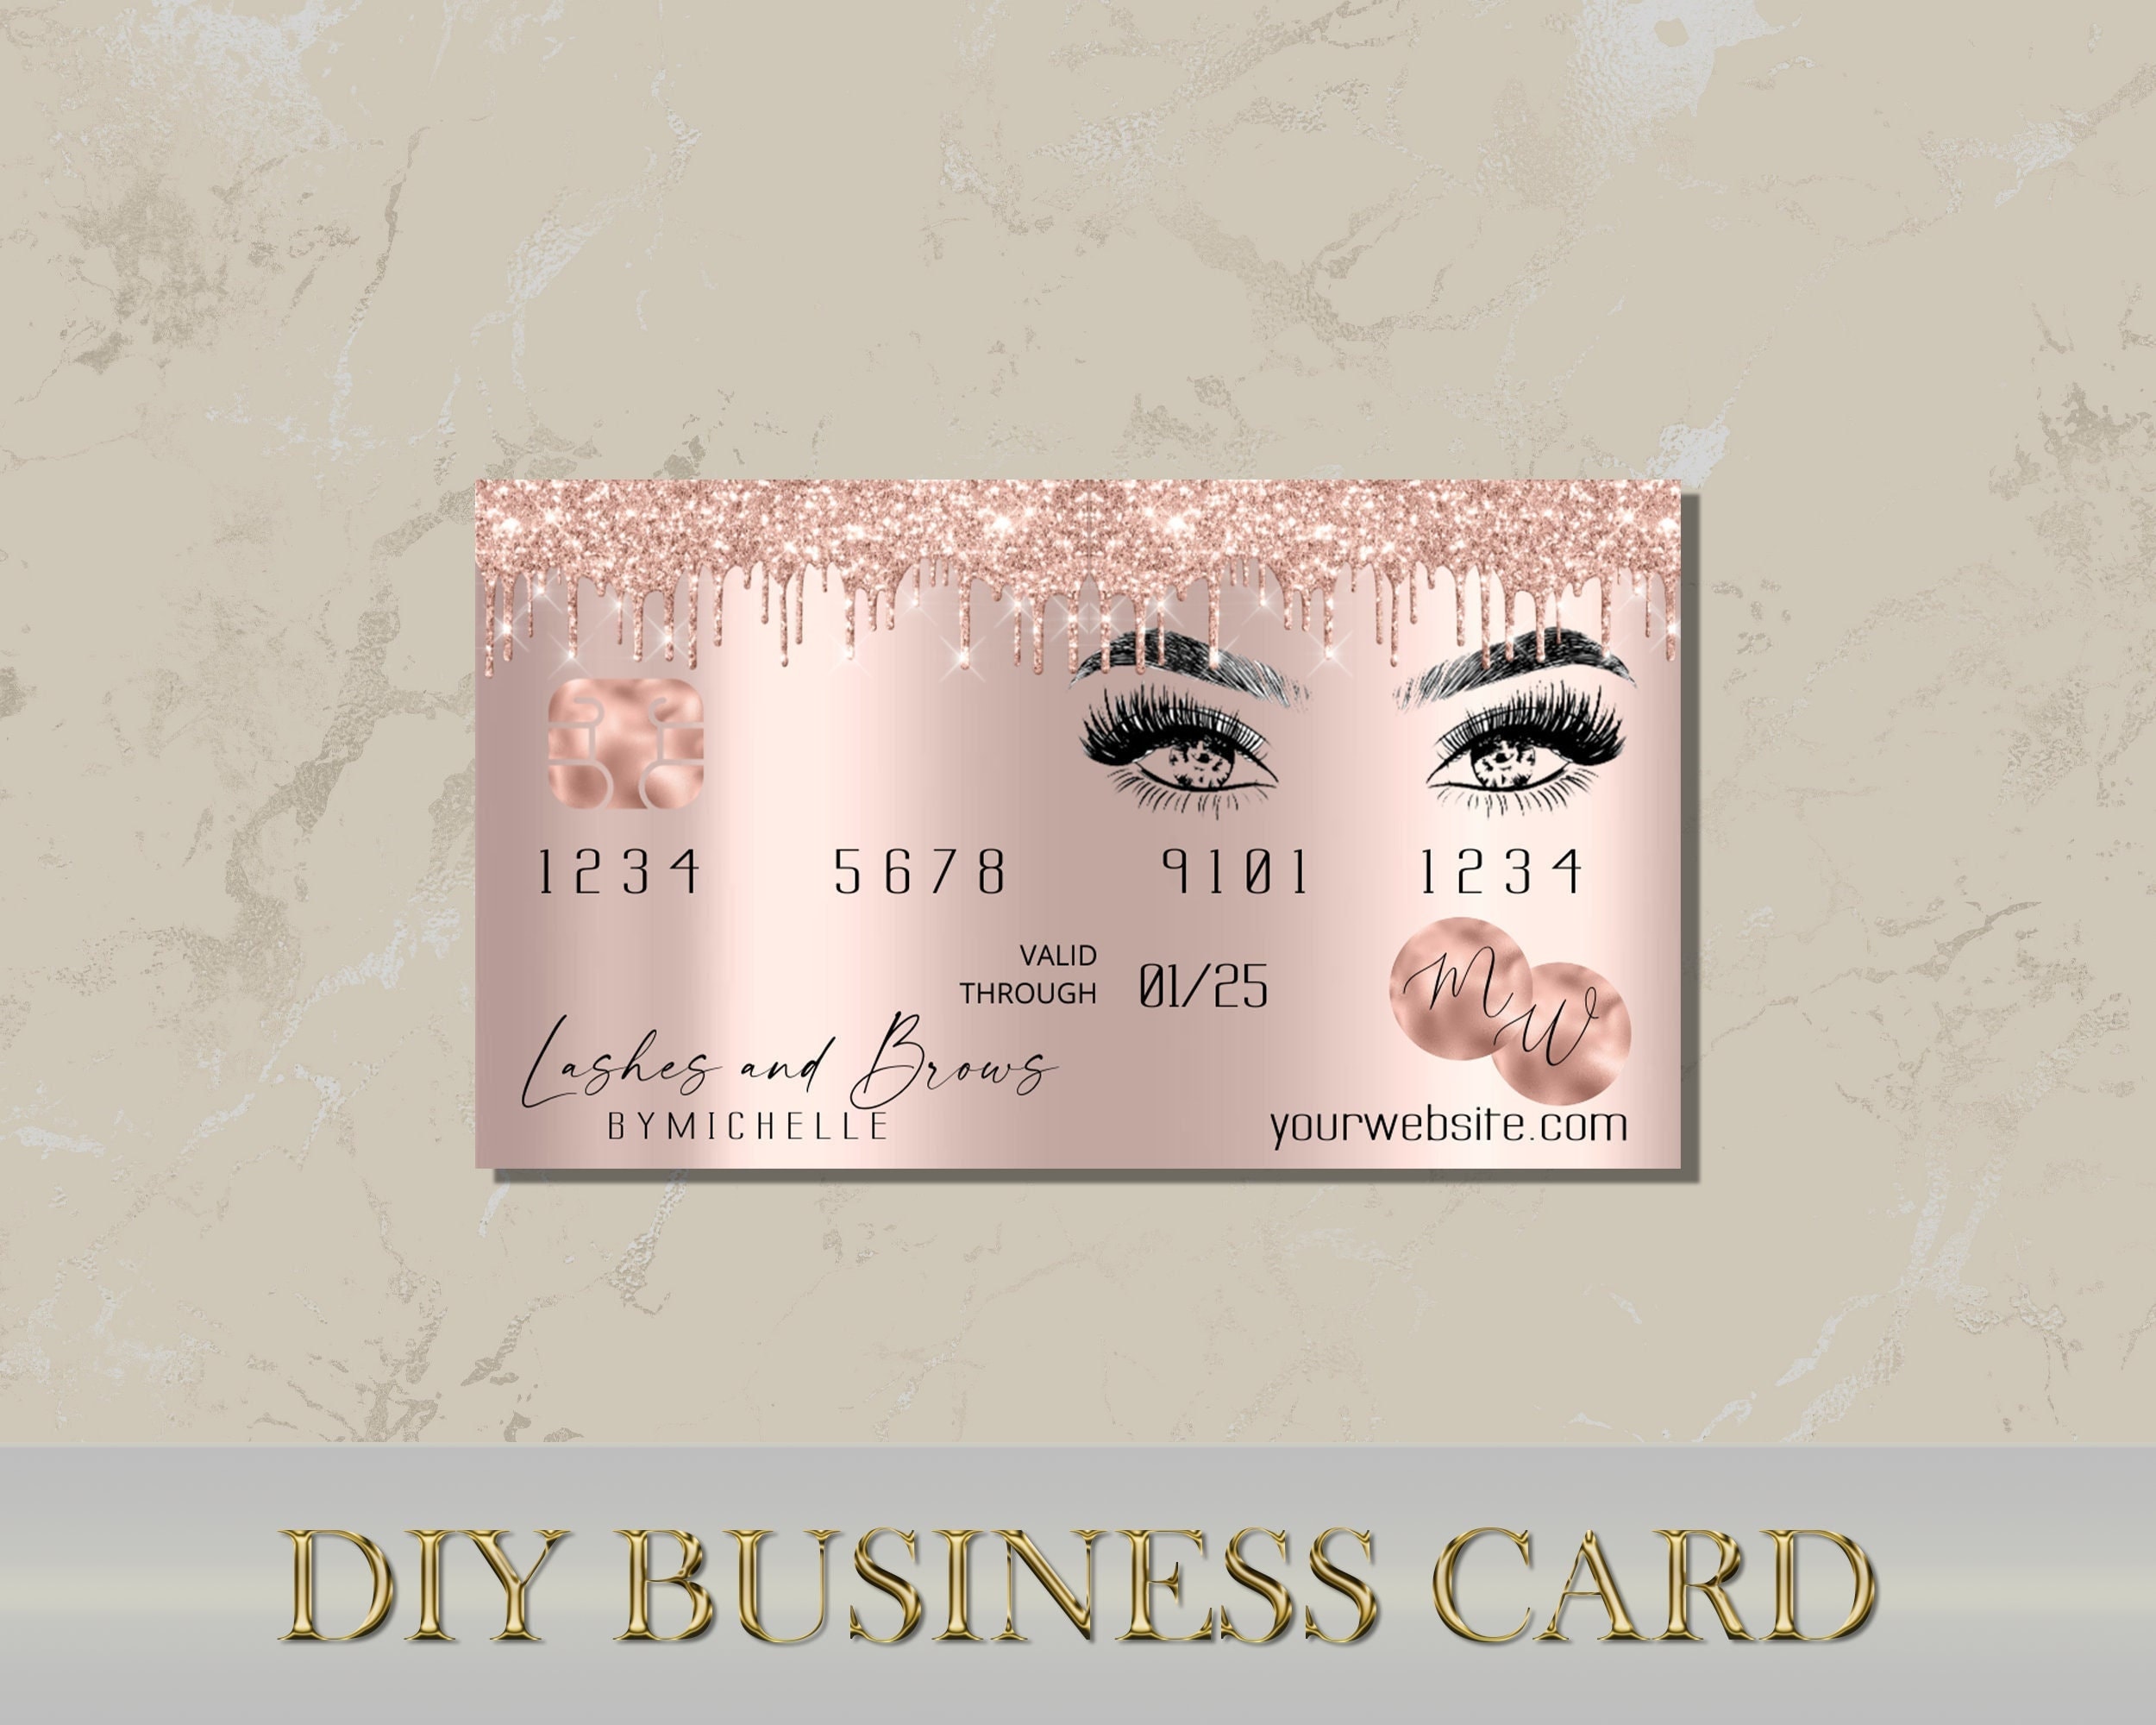 200 Business Cards or Calling Cards 16 PT Shimmer Pearl Shiny